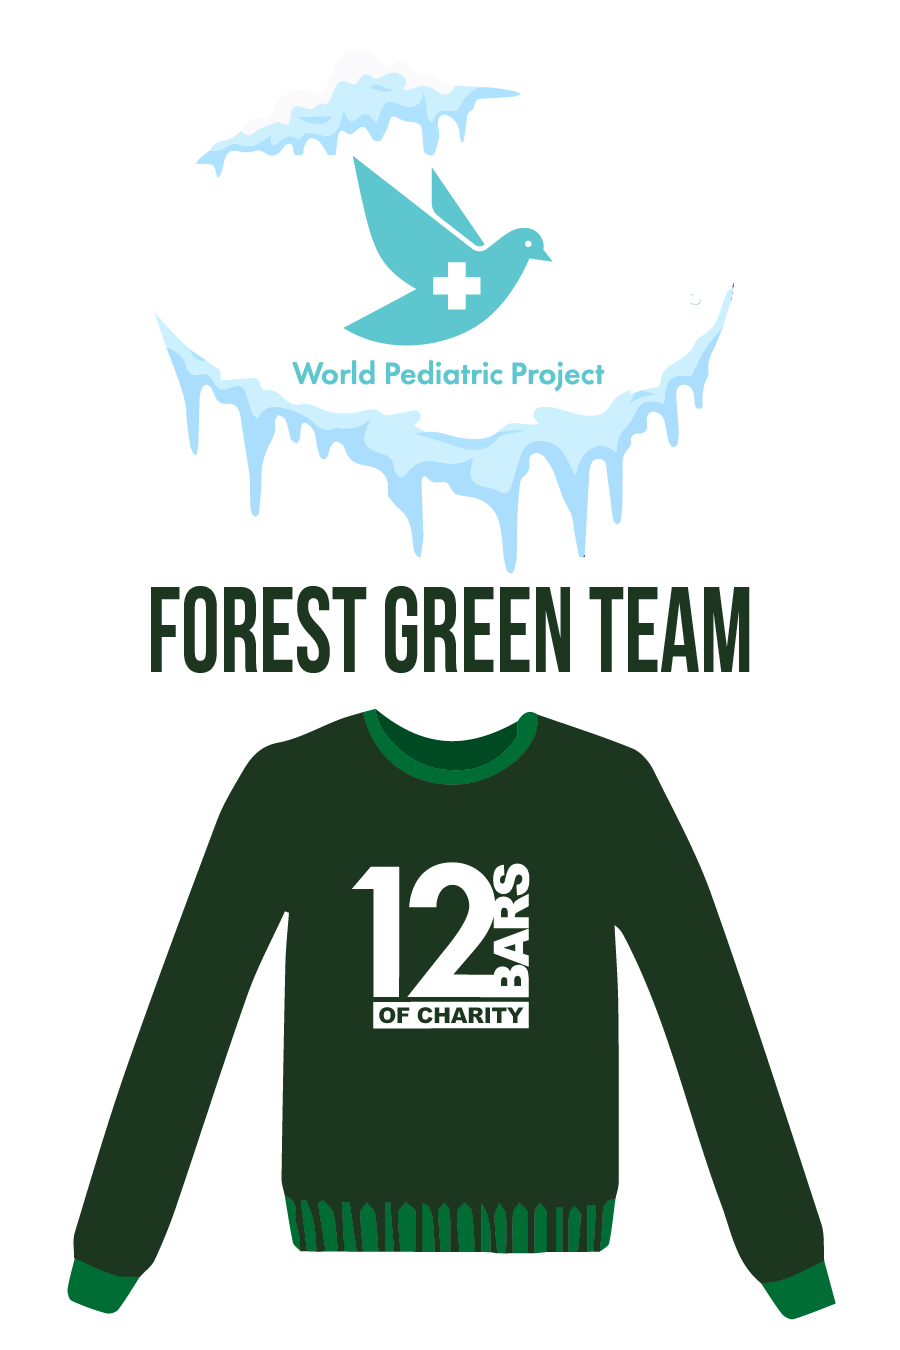 World Pediatric Project - Team Forest Green